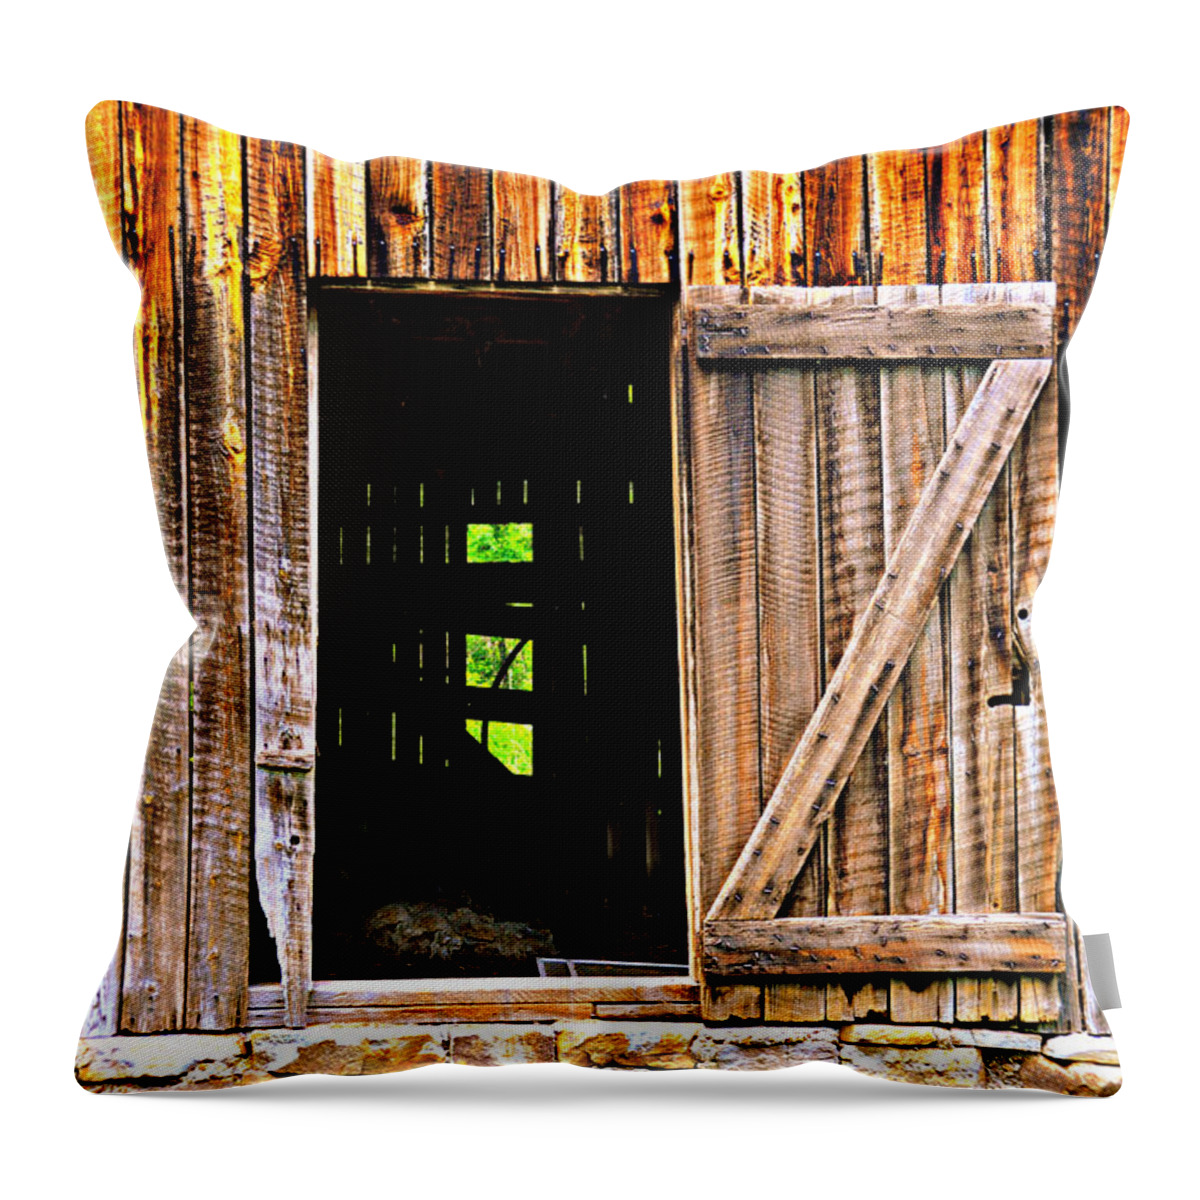 Barn Throw Pillow featuring the photograph Weathered Barn Door by Marty Koch